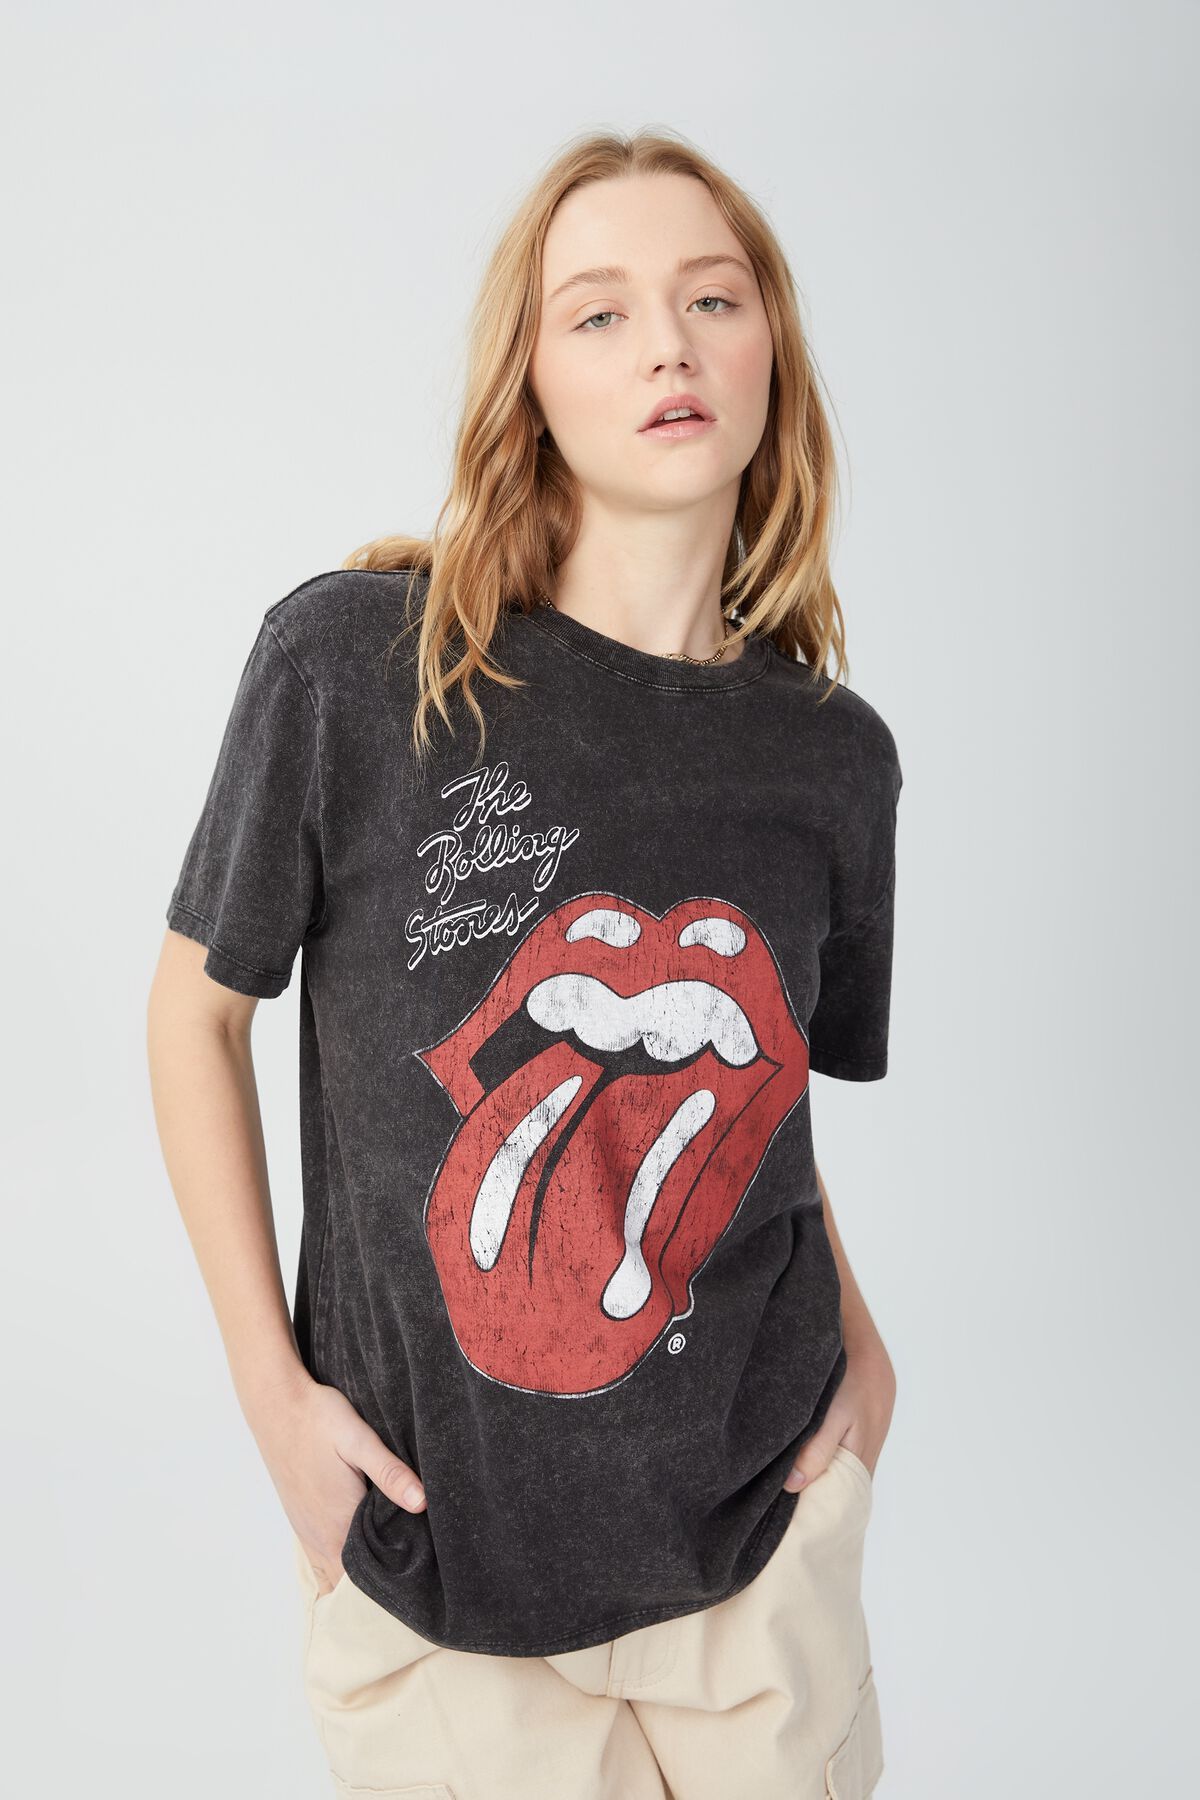 Regular Fit Rolling Stones Tee | Cotton On (ANZ)